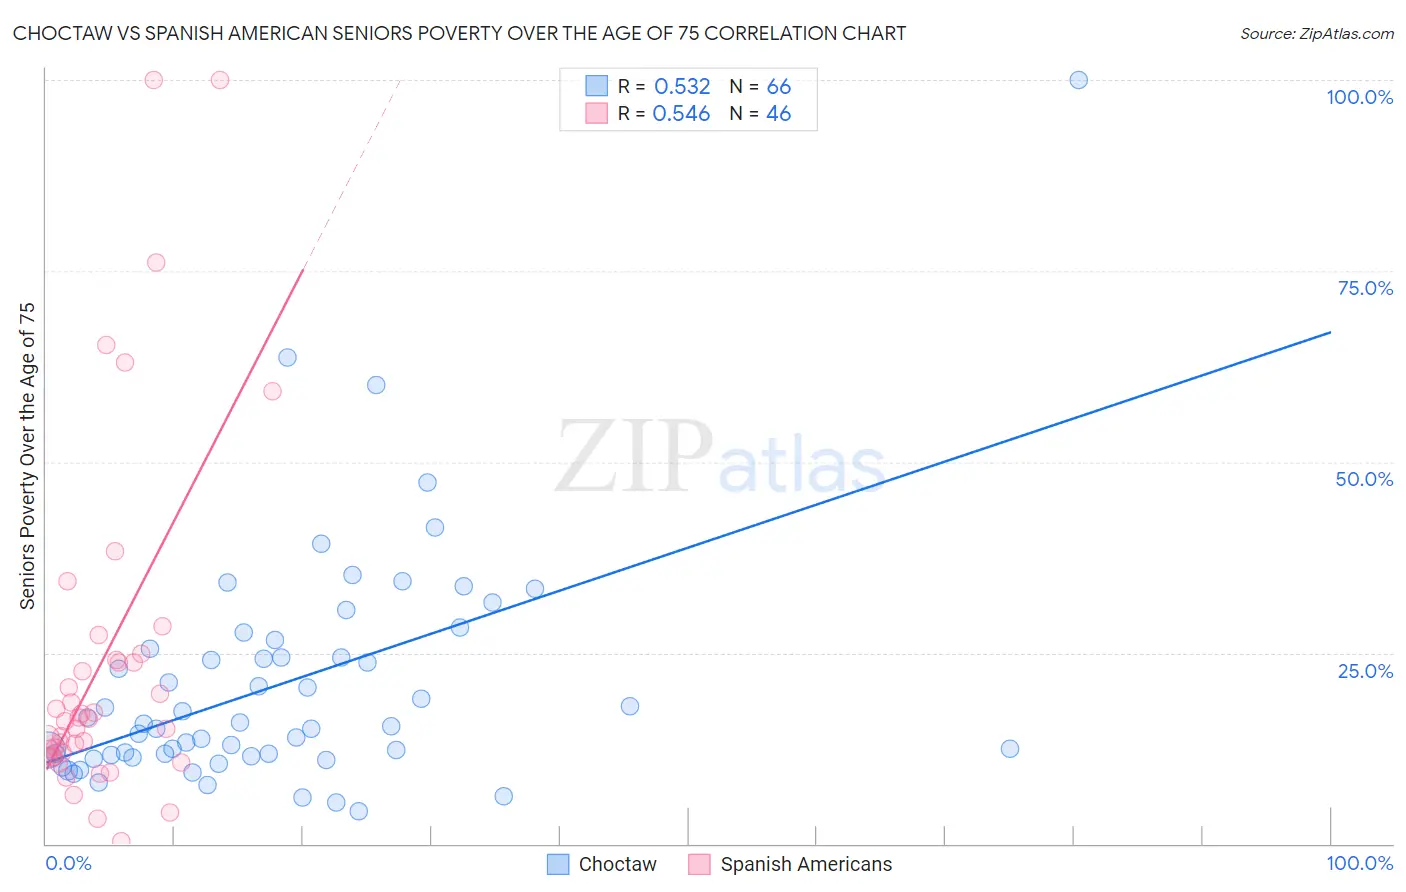 Choctaw vs Spanish American Seniors Poverty Over the Age of 75